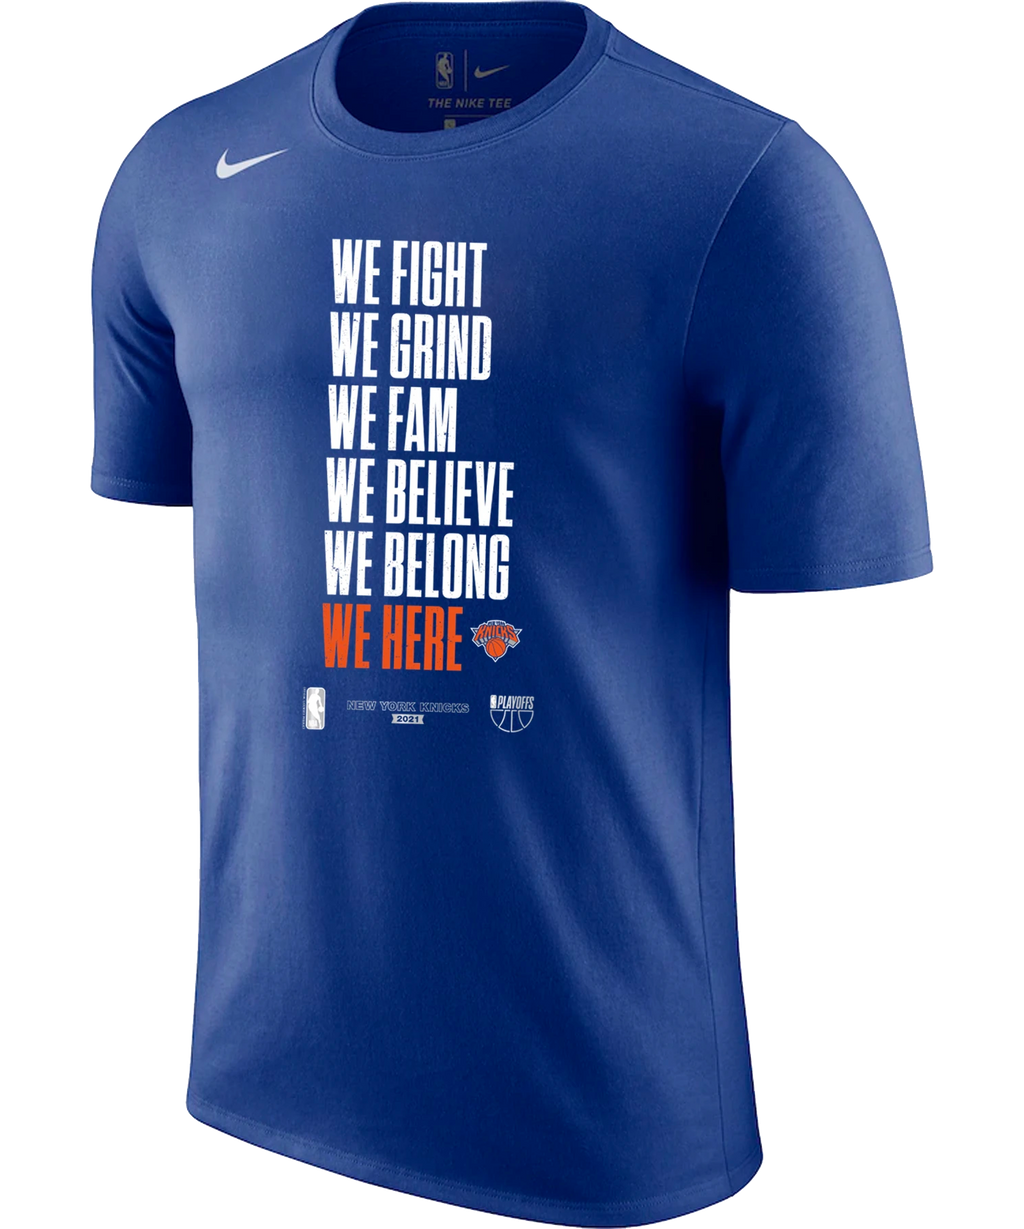 NBA PLAYOFFS MANTRA TEES 2021 – NBA Store Philippines